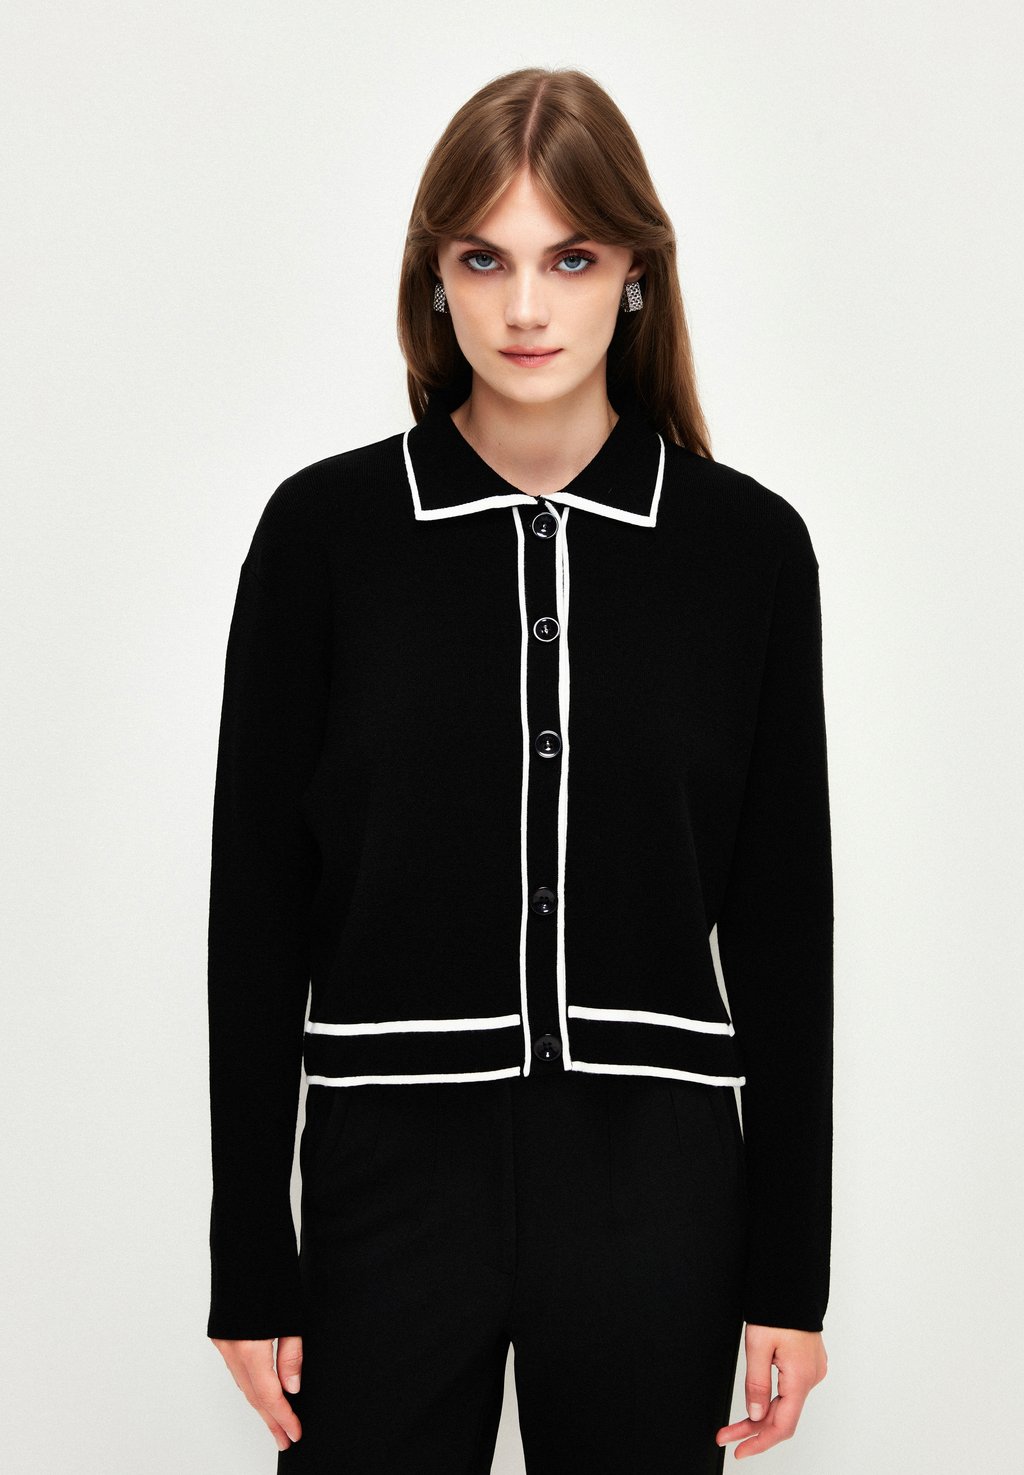 Кардиган BUTTONED FRONT adL, цвет black